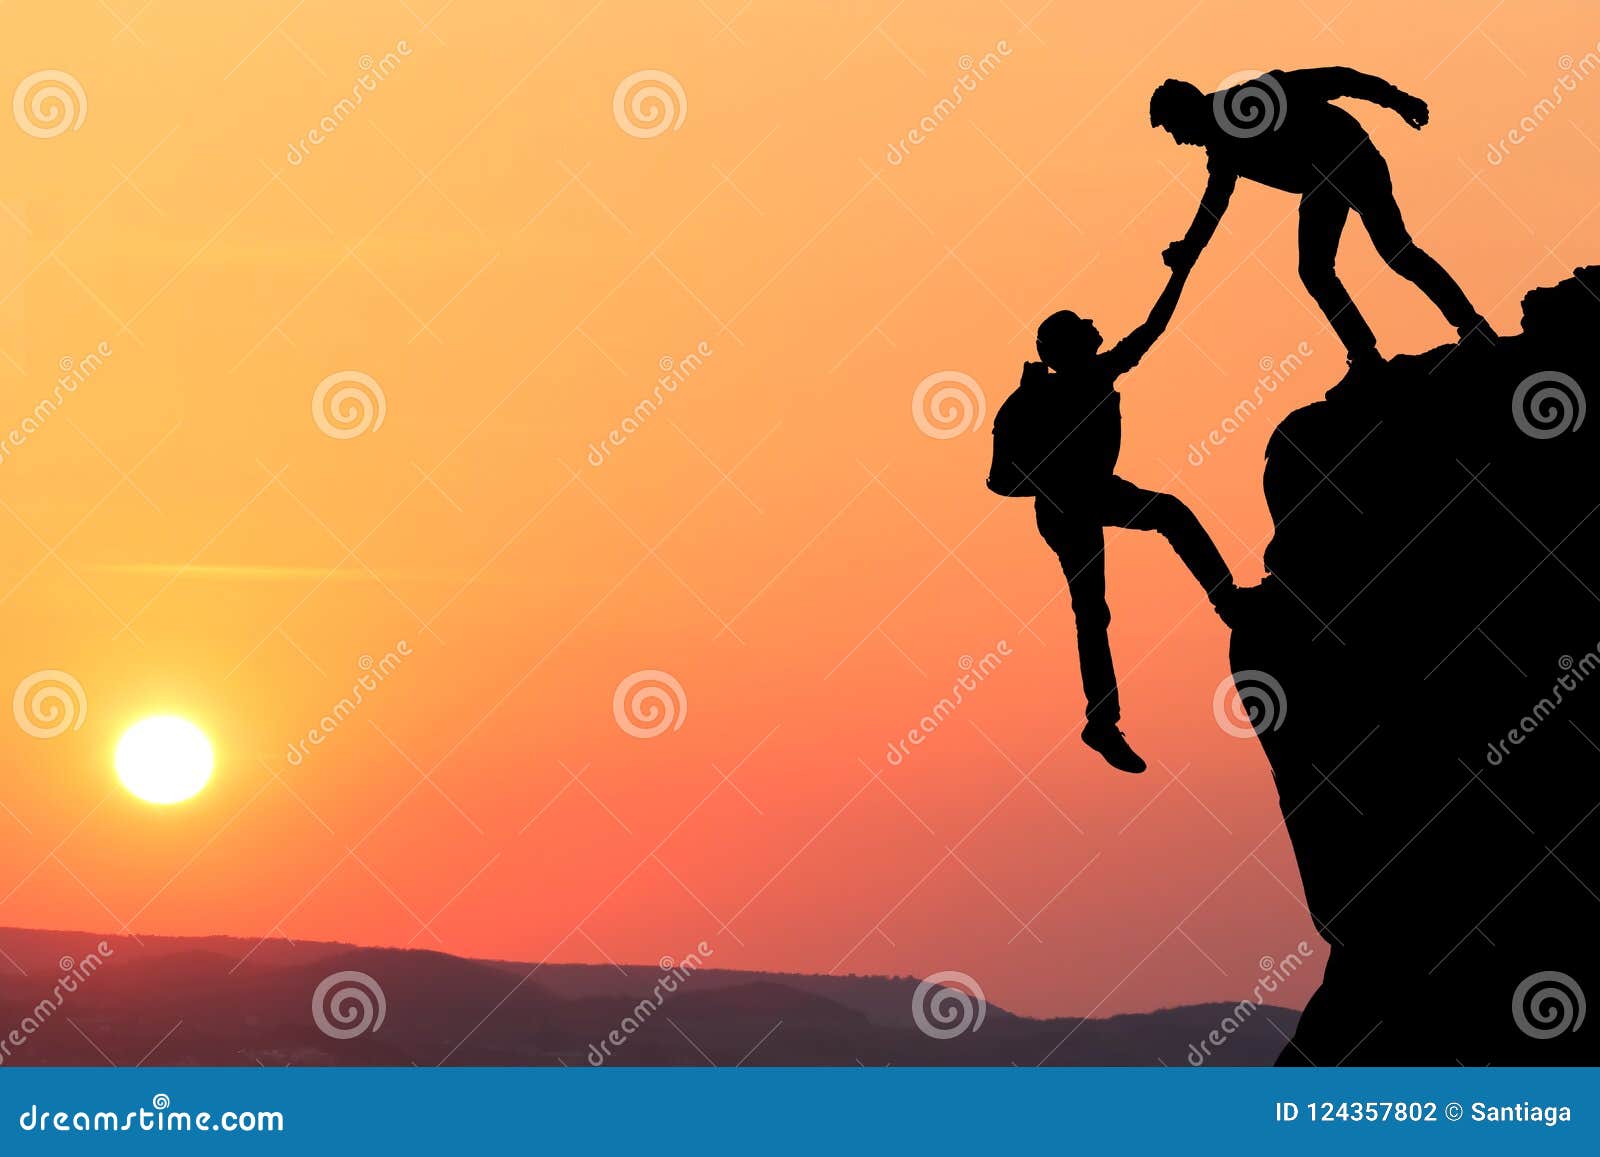 teamwork couple hiking help each other trust assistance silhouette in mountains, sunset. teamwork of two men hiker helping each ot